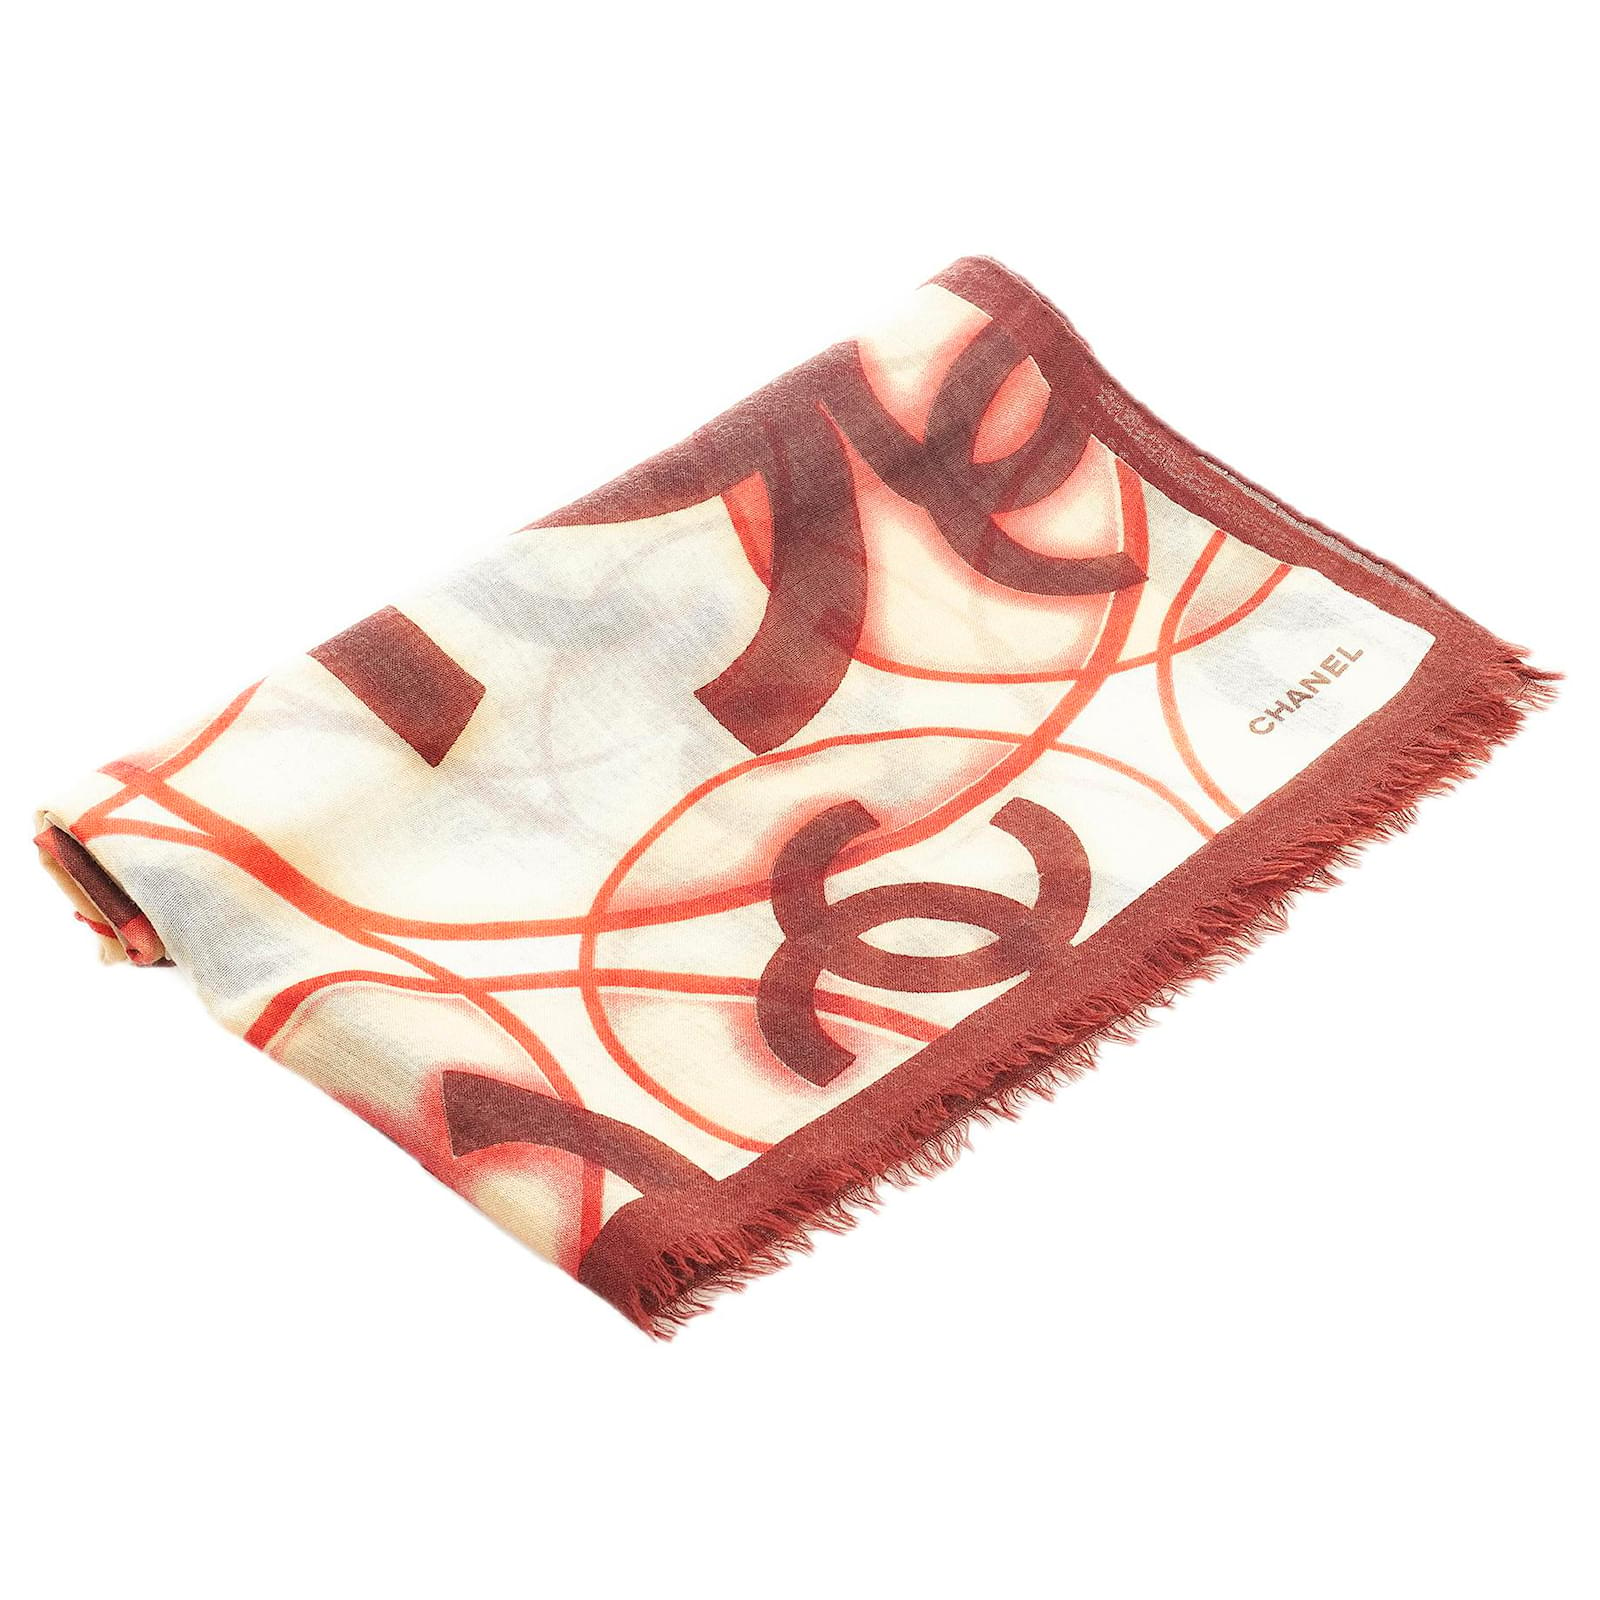 Get the best choiceVintage CC Logo Red Silk Floral Scarf by Chanel